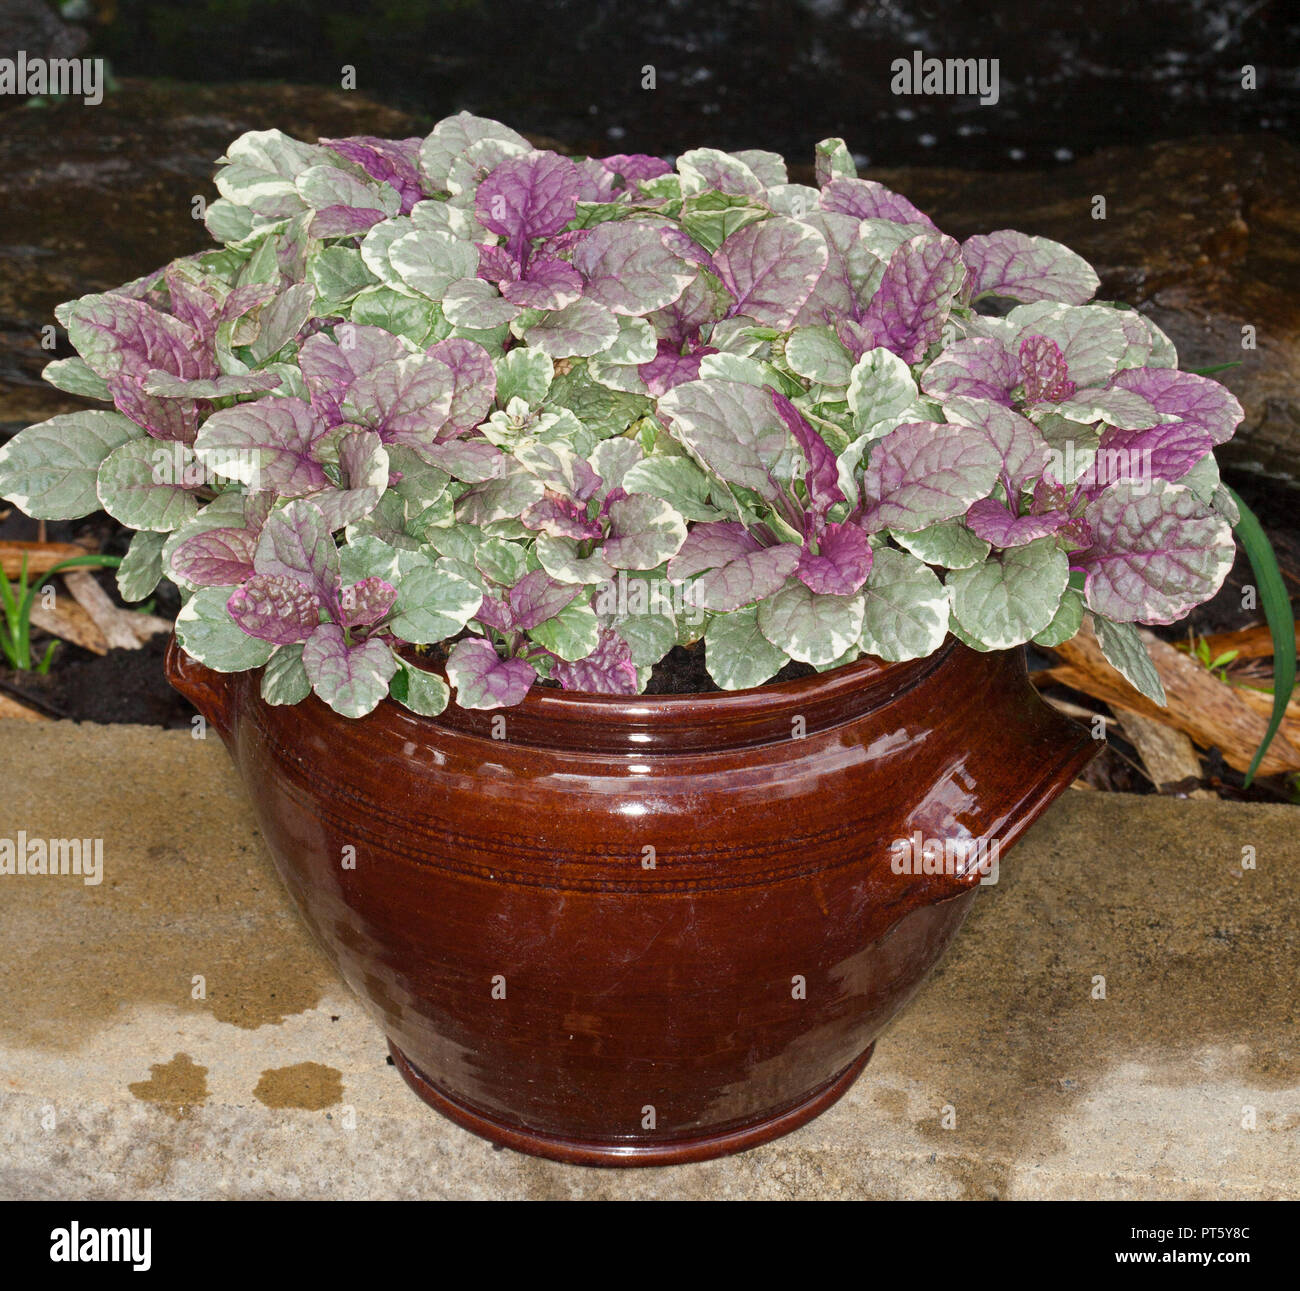 Ajuga reptans 'Burgundy Glow', perennial plant with attractive red, cream and green variegated leaves growing in decorative container Stock Photo